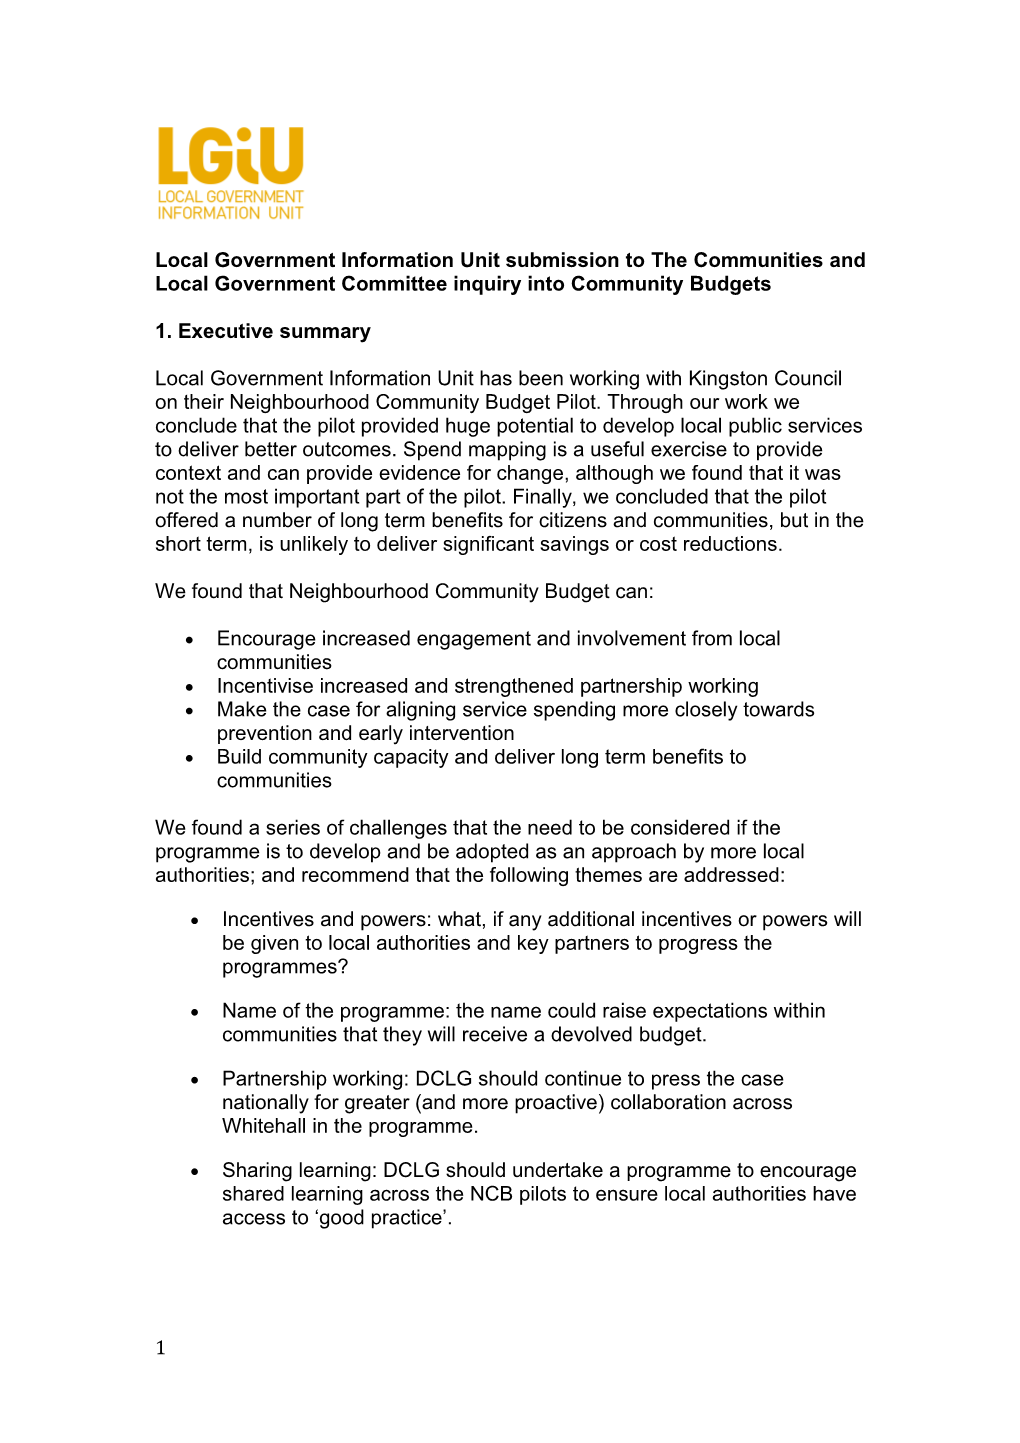 Local Government Information Unit Submission to the Communities and Local Government Committee